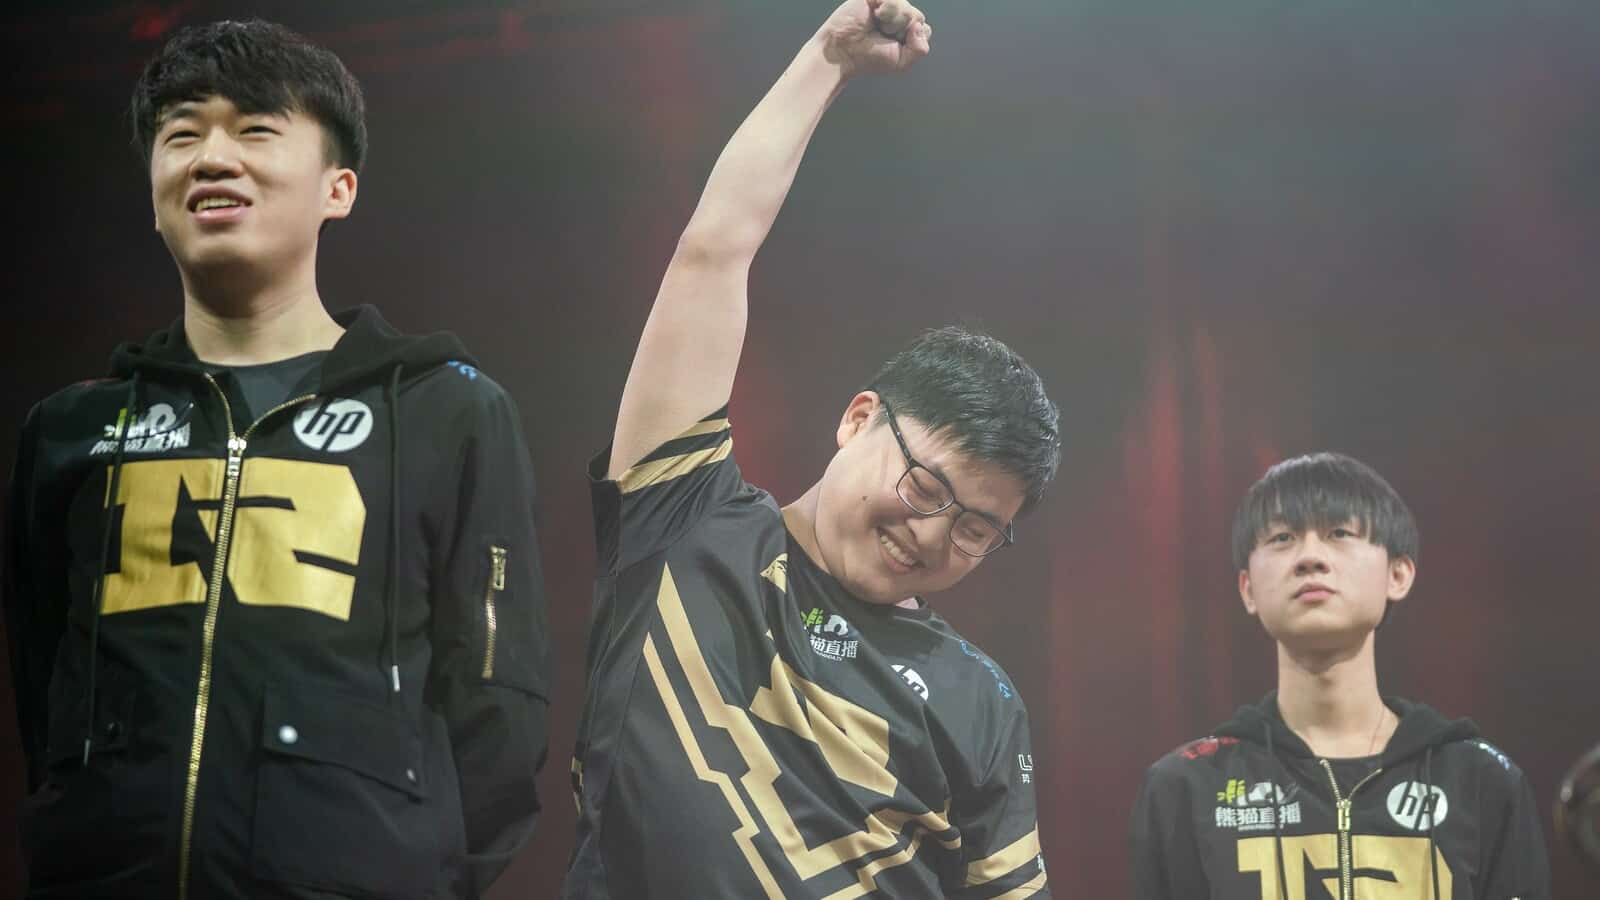 LoL player Uzi raises his first on the MSI stage with his teammates